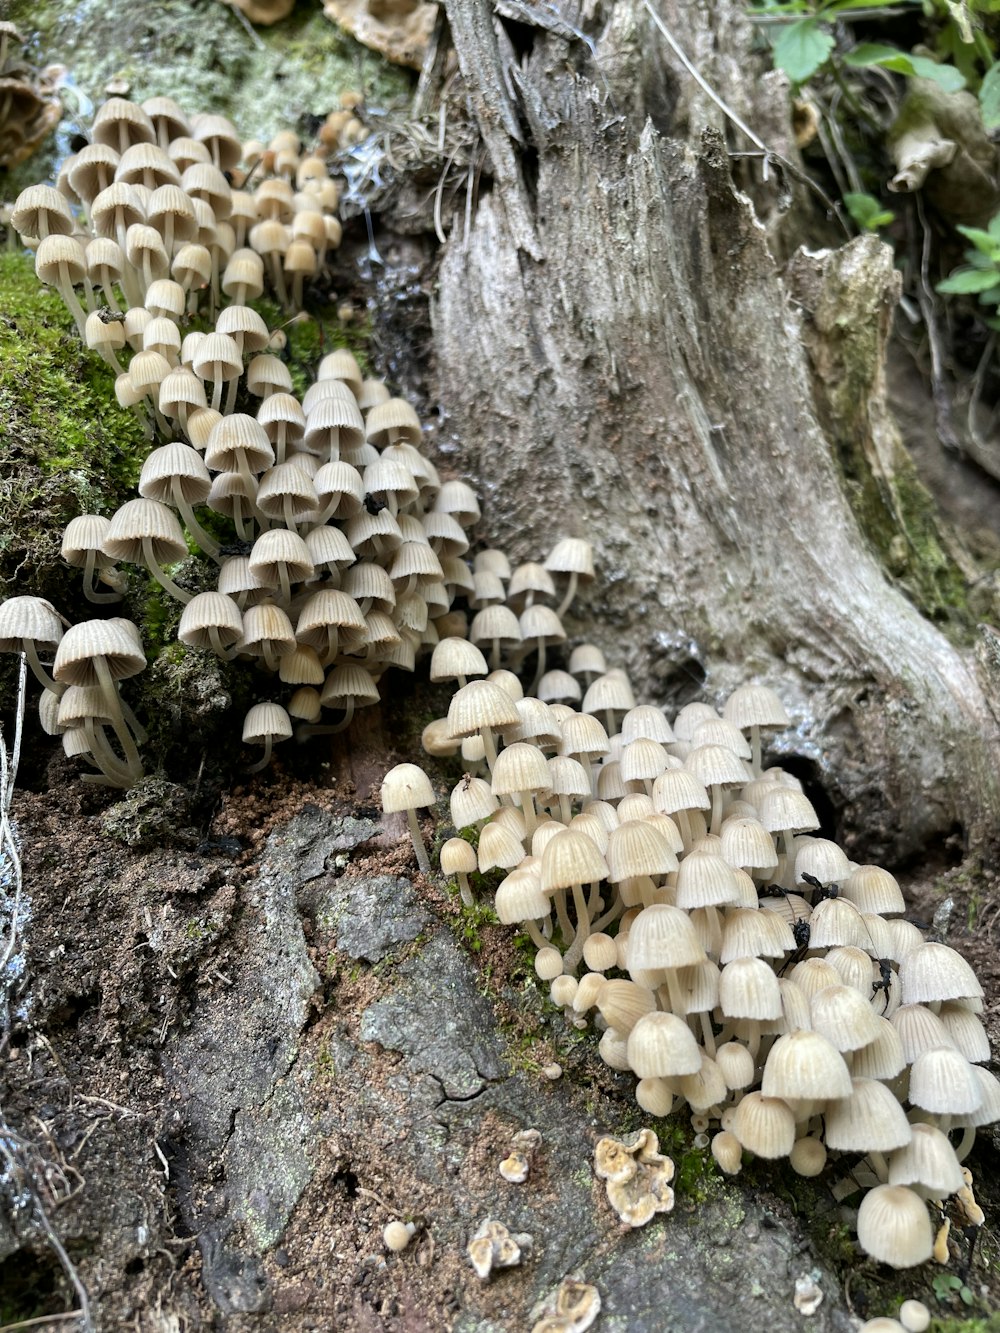 a group of mushrooms growing on a tree